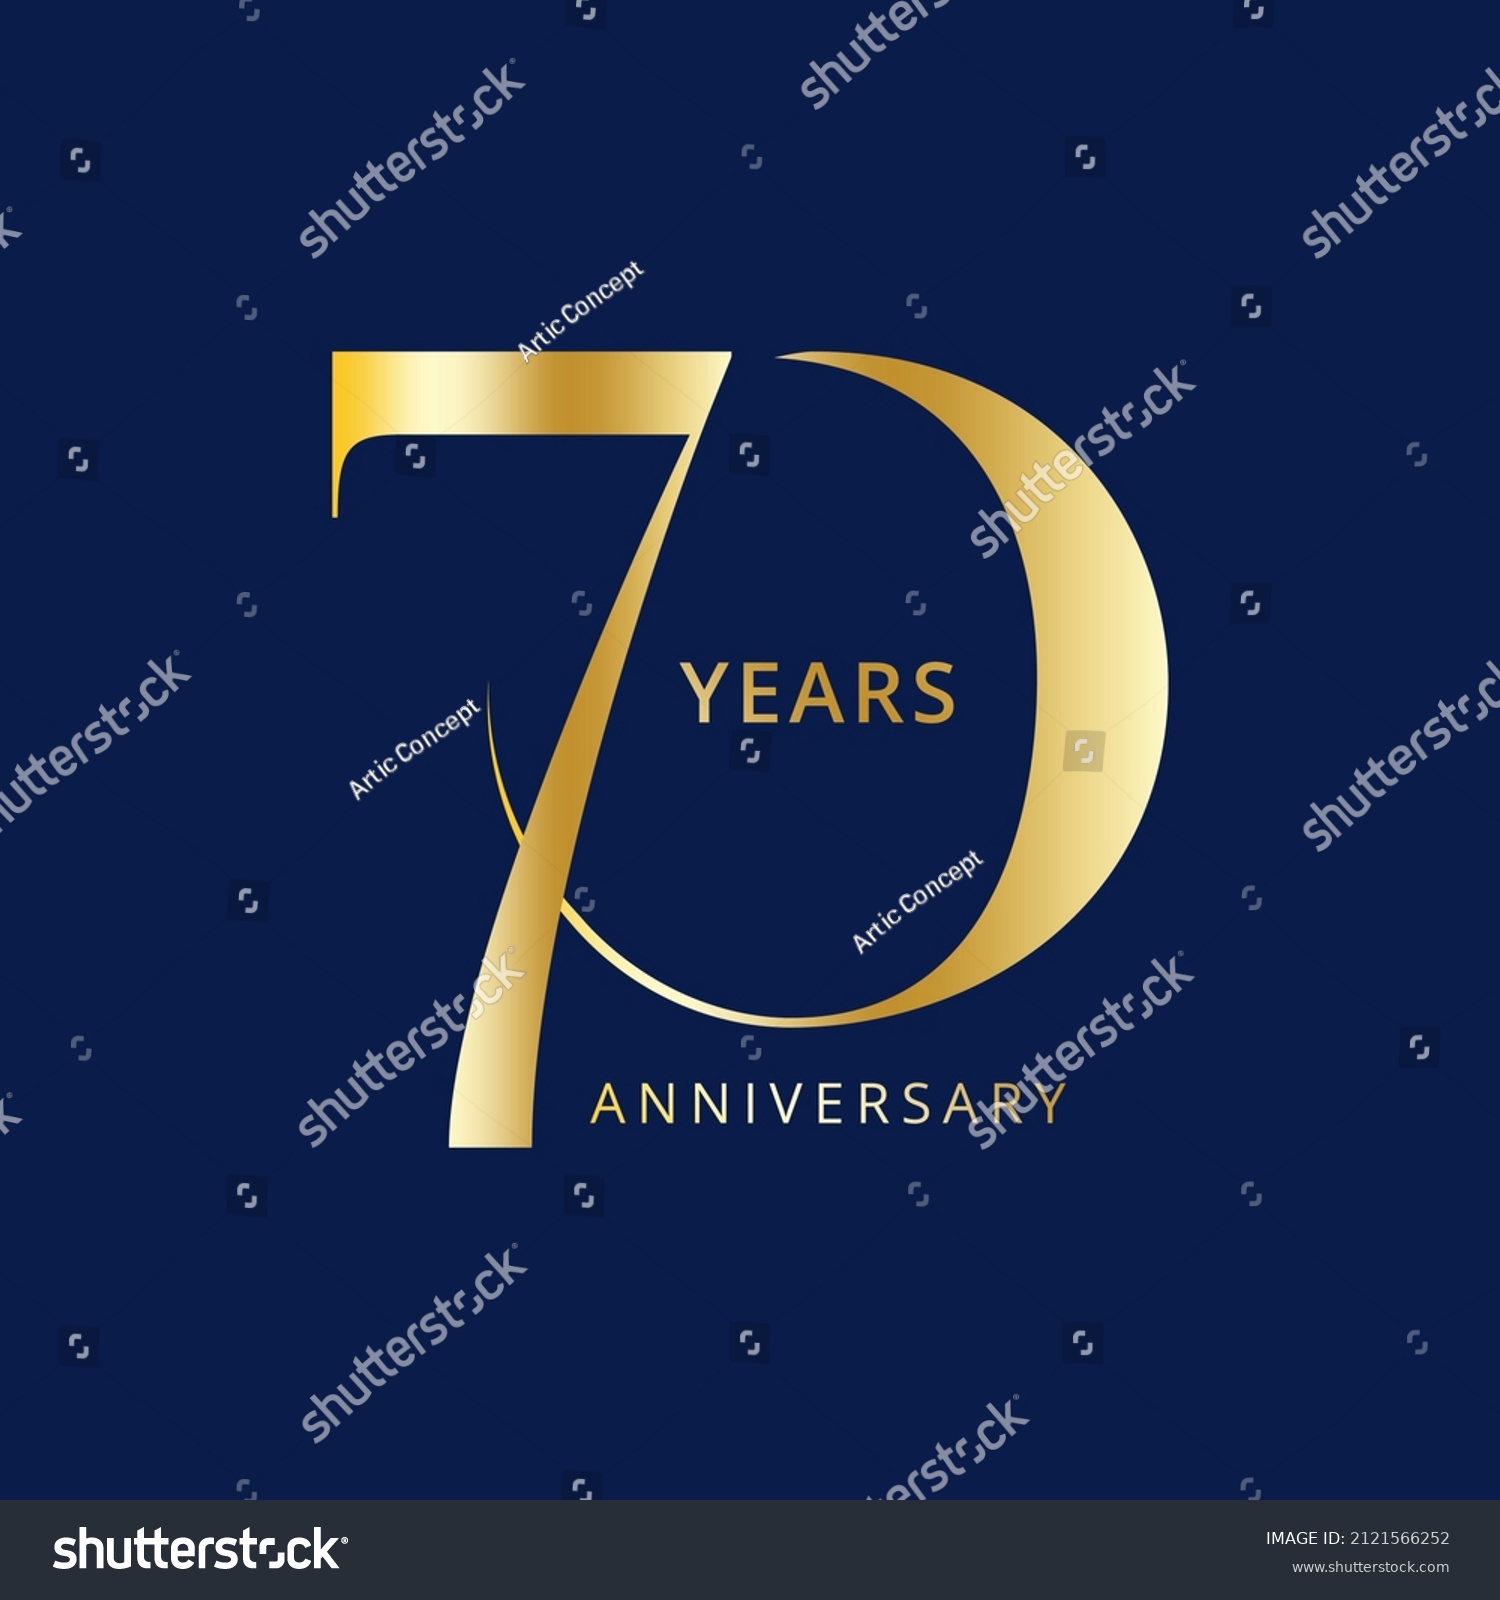 SVG of 70 Year Anniversary Logo, Golden Color, Vector Template Design element for birthday, invitation, wedding, jubilee and greeting card illustration. svg